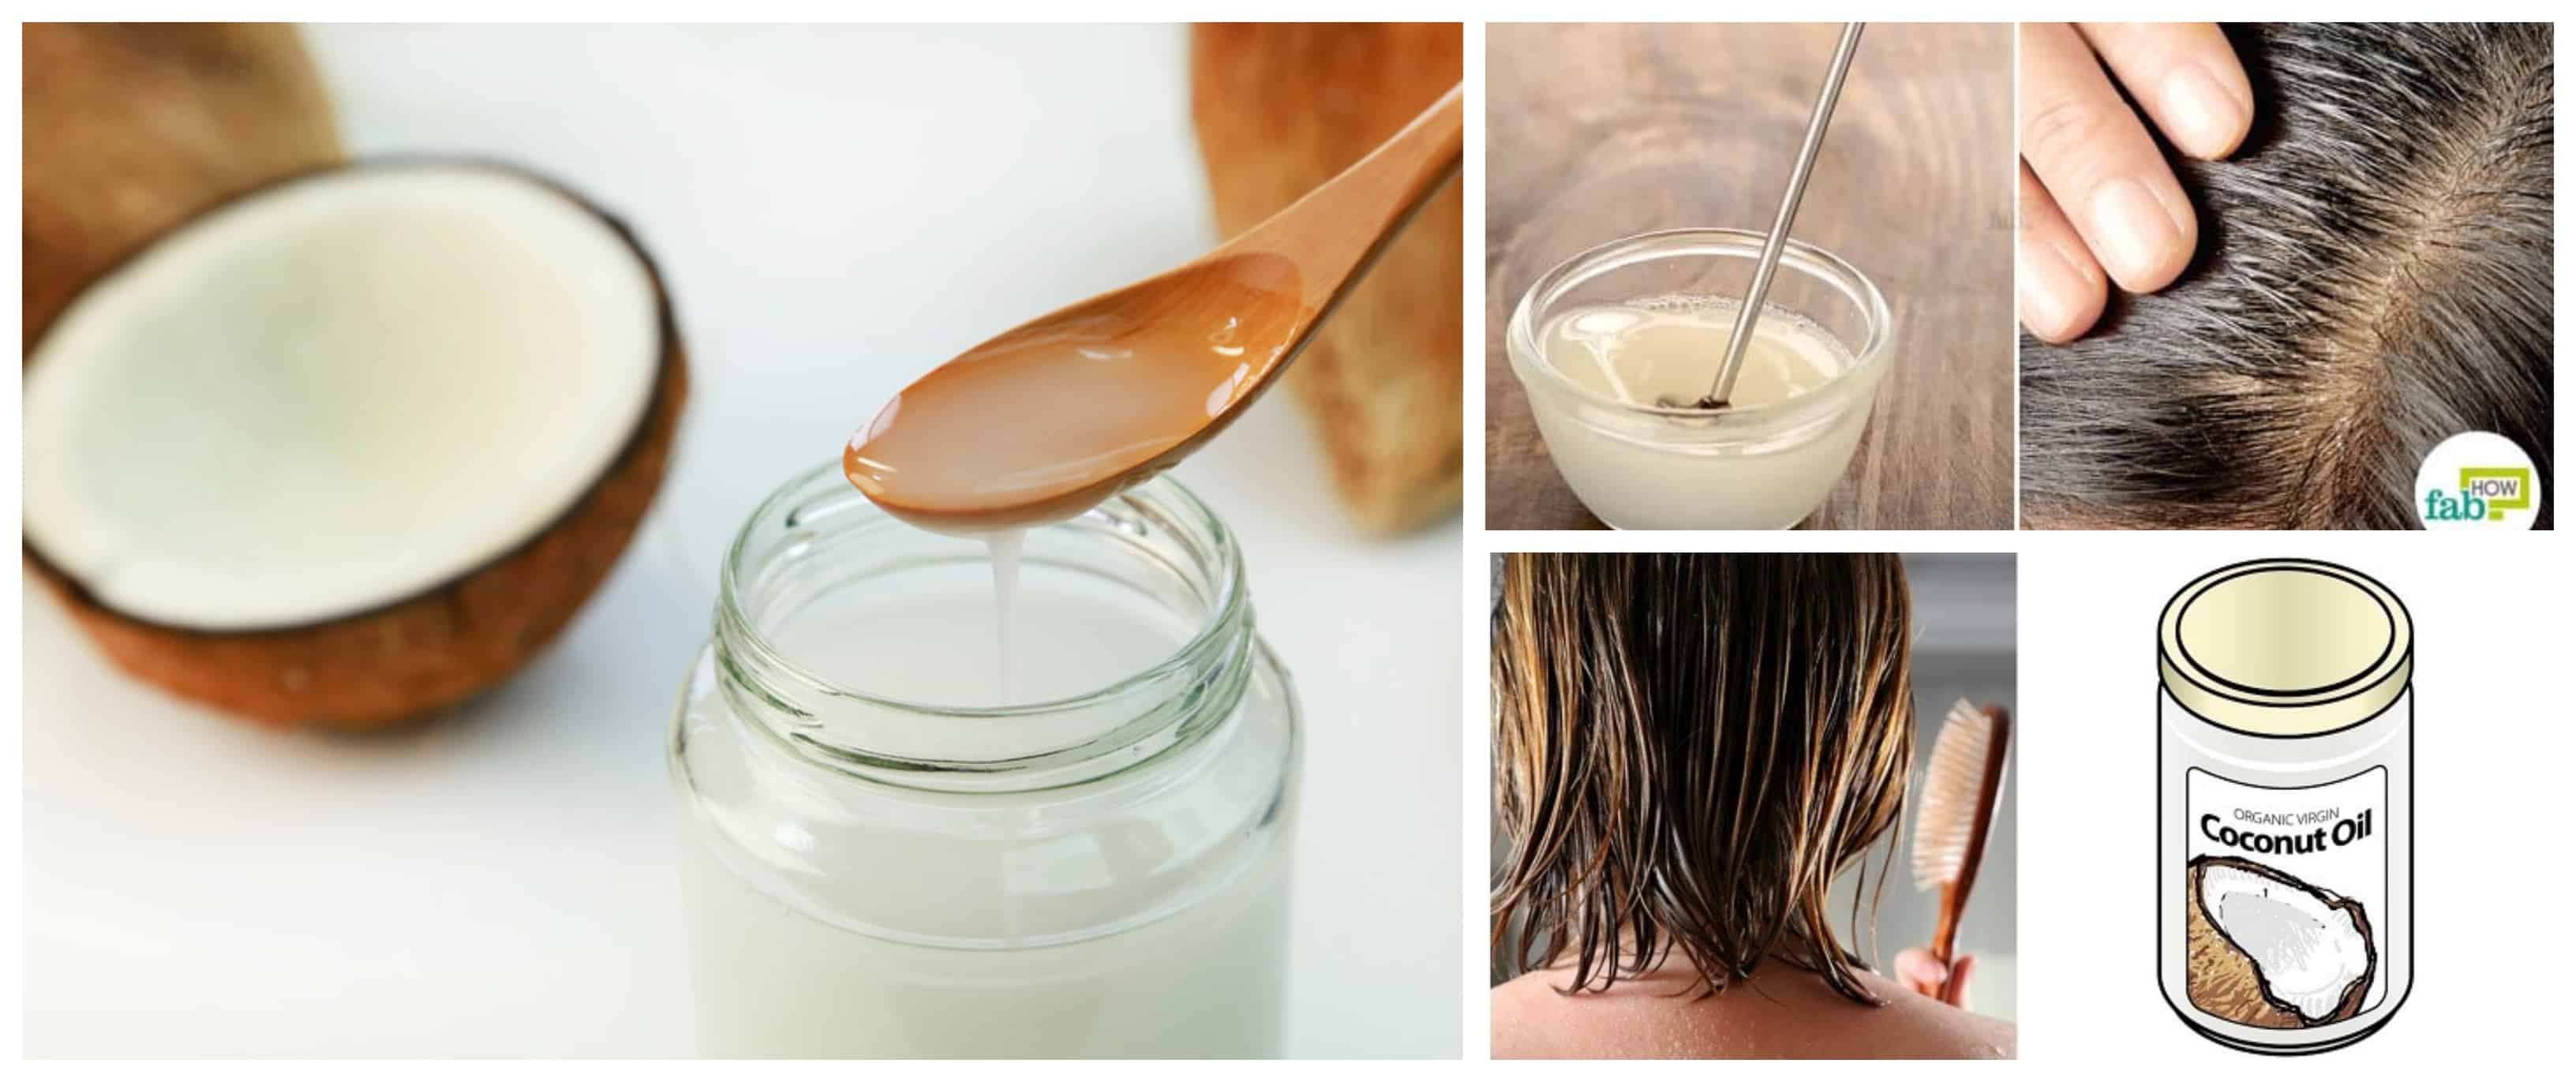 Homemade Coconut Oil Shampoos For Hair You Must Try - ALL FOR FASHION